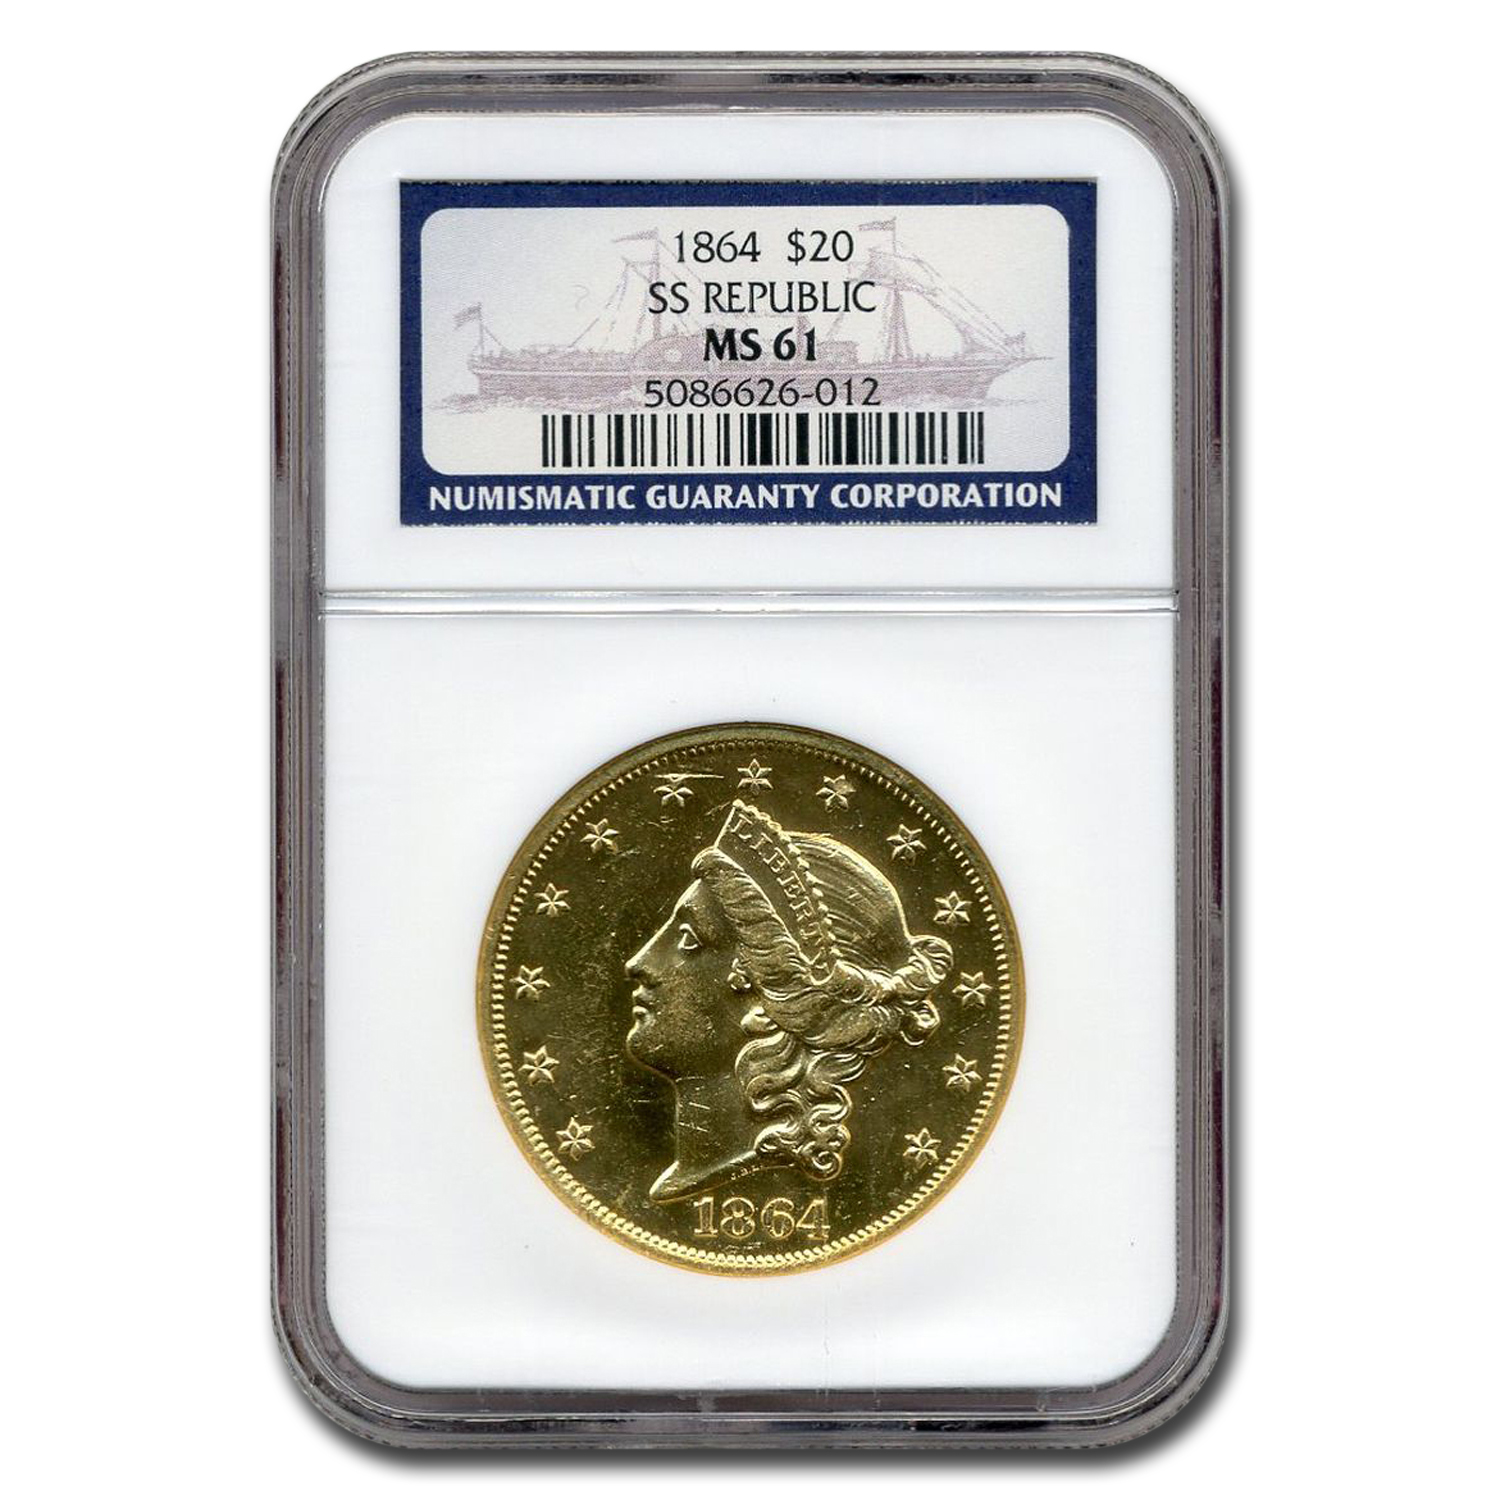 Buy 1864 $20 Liberty Gold Double Eagle MS-61 NGC (SS Republic)